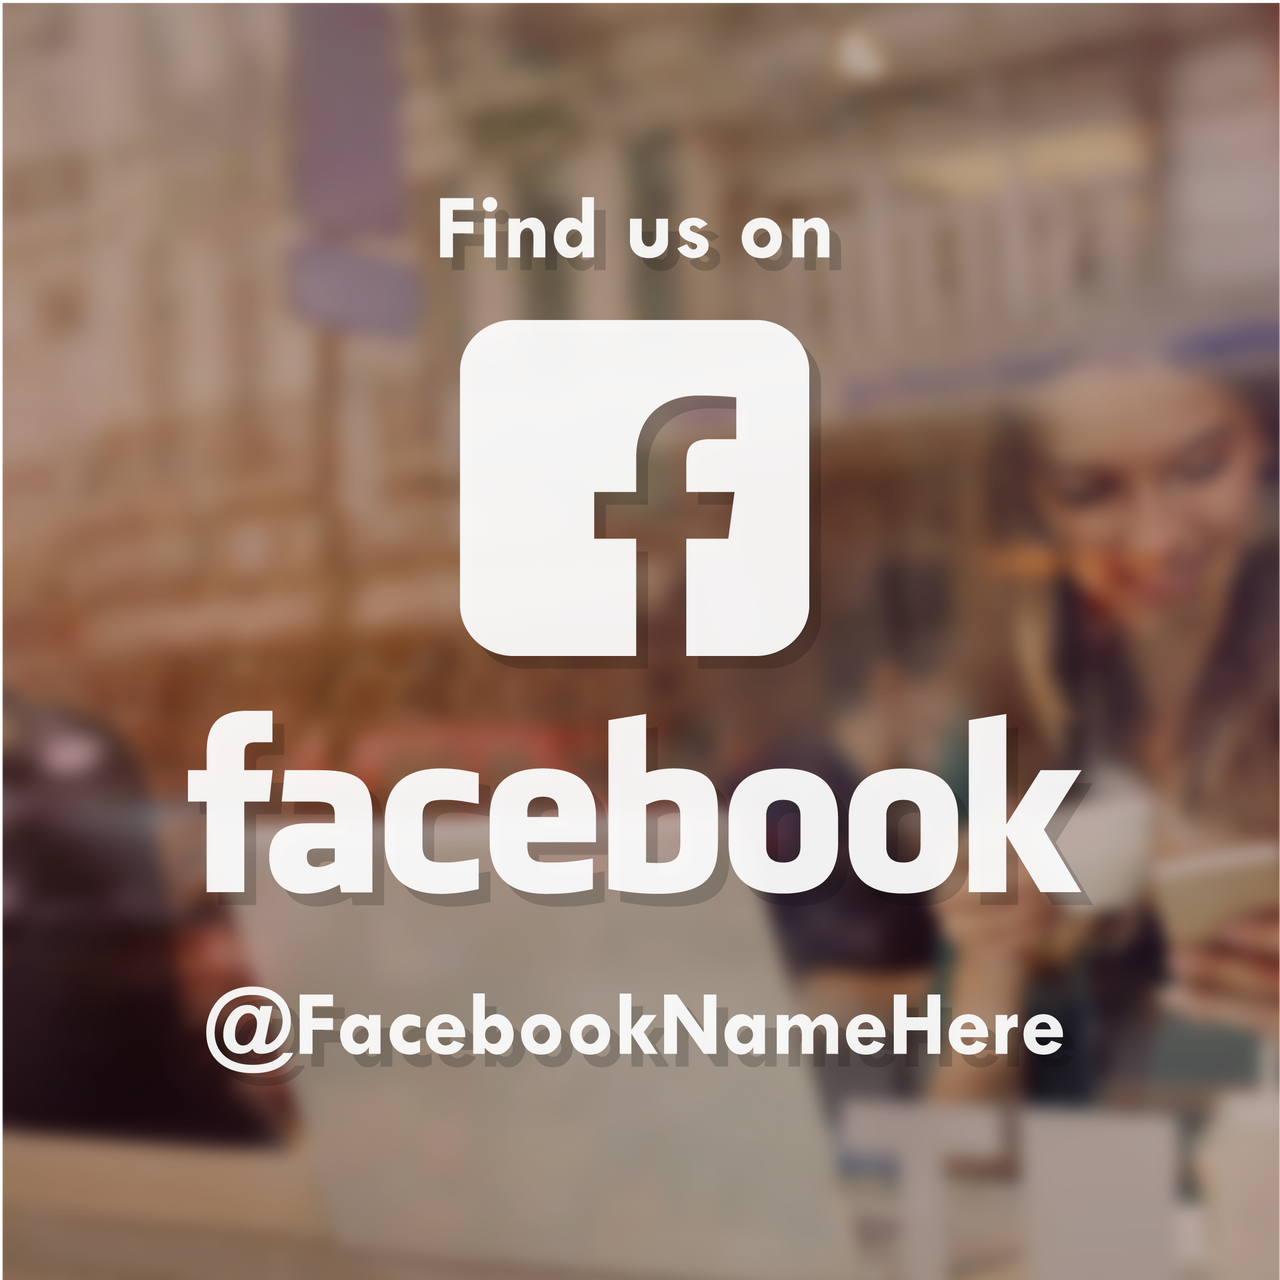 FIND US ON FACEBOOK - Social Media Window Decal (Type 3)